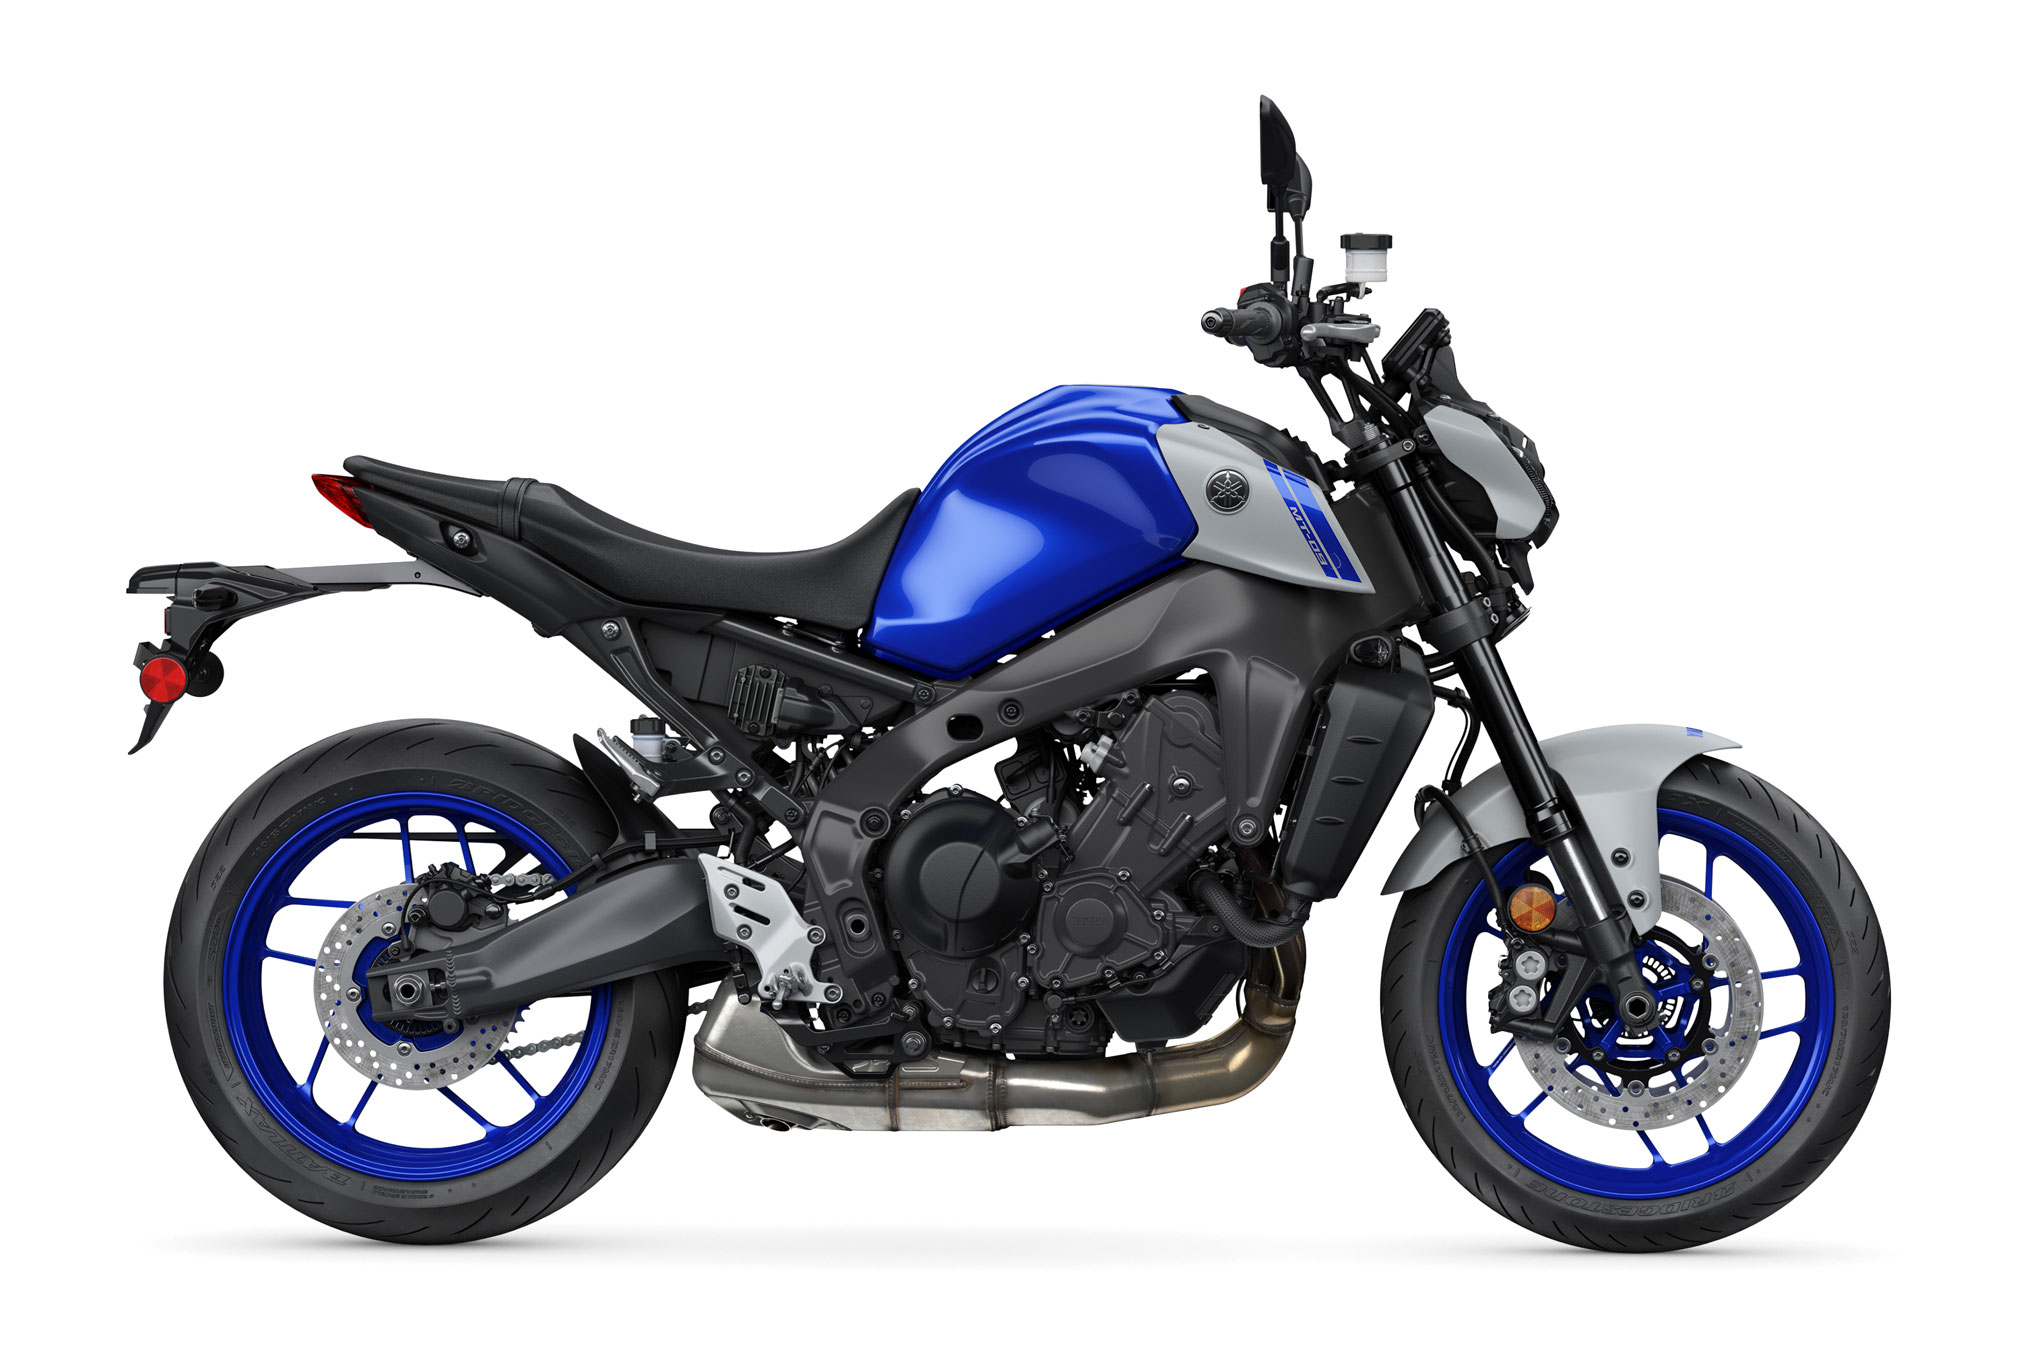 2021 Yamaha MT-09 Guide • Total Motorcycle